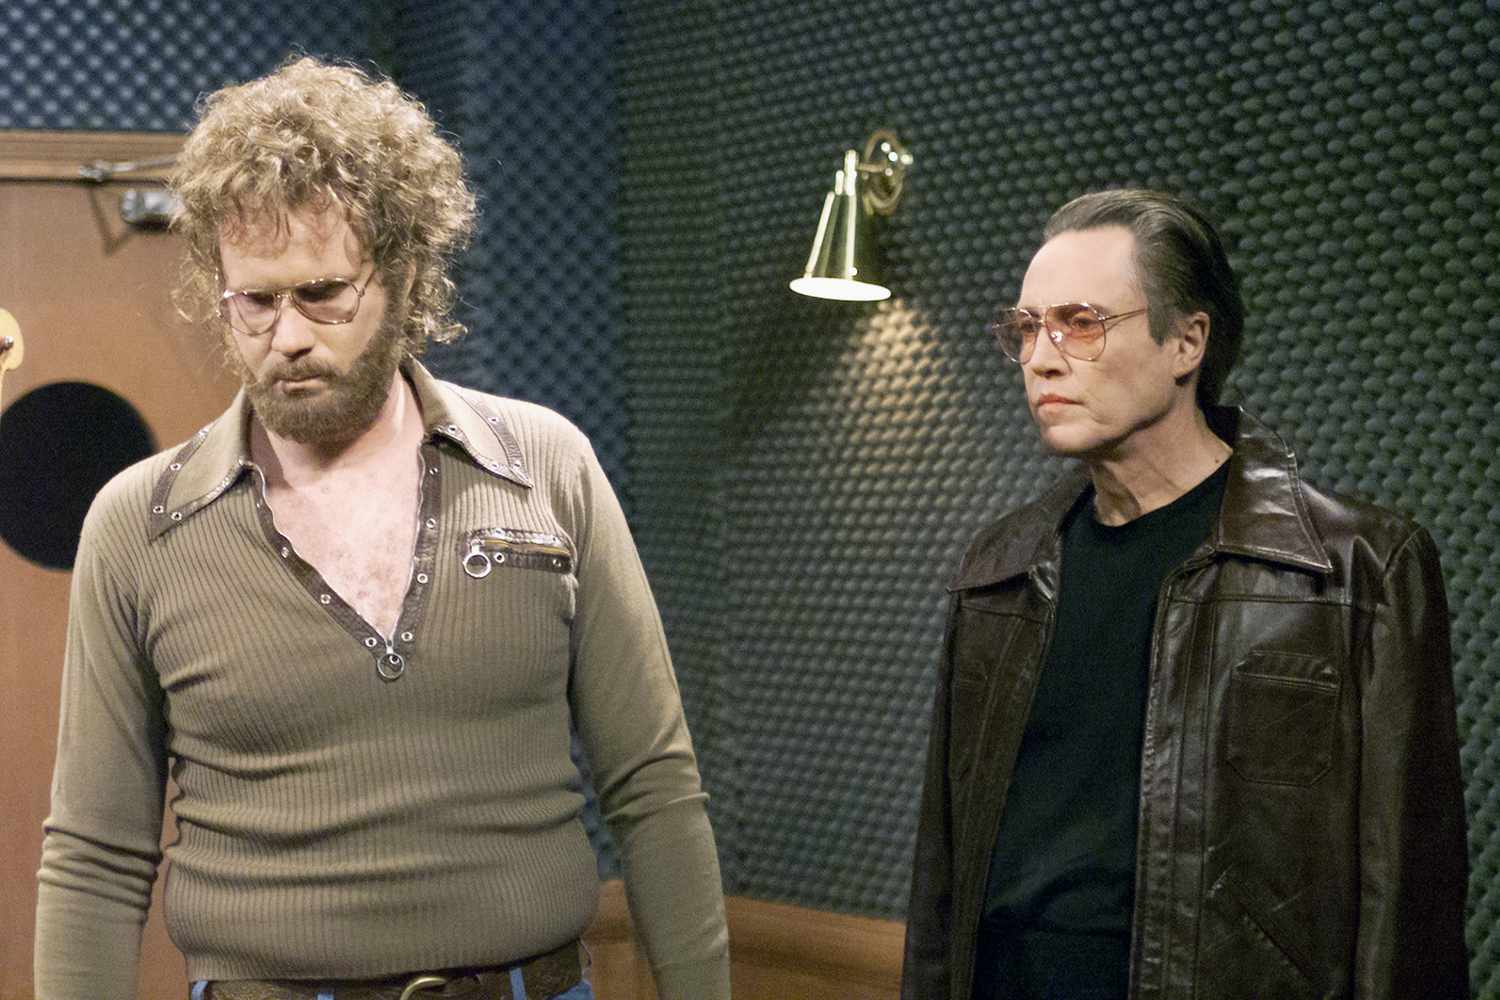 SATURDAY NIGHT LIVE -- Episode 16 -- Pictured: (l-r) Will Ferrell as Gene Frenkle, Christopher Walken as Bruce Dickinson during "Behind the Music" skit on April 8, 2000